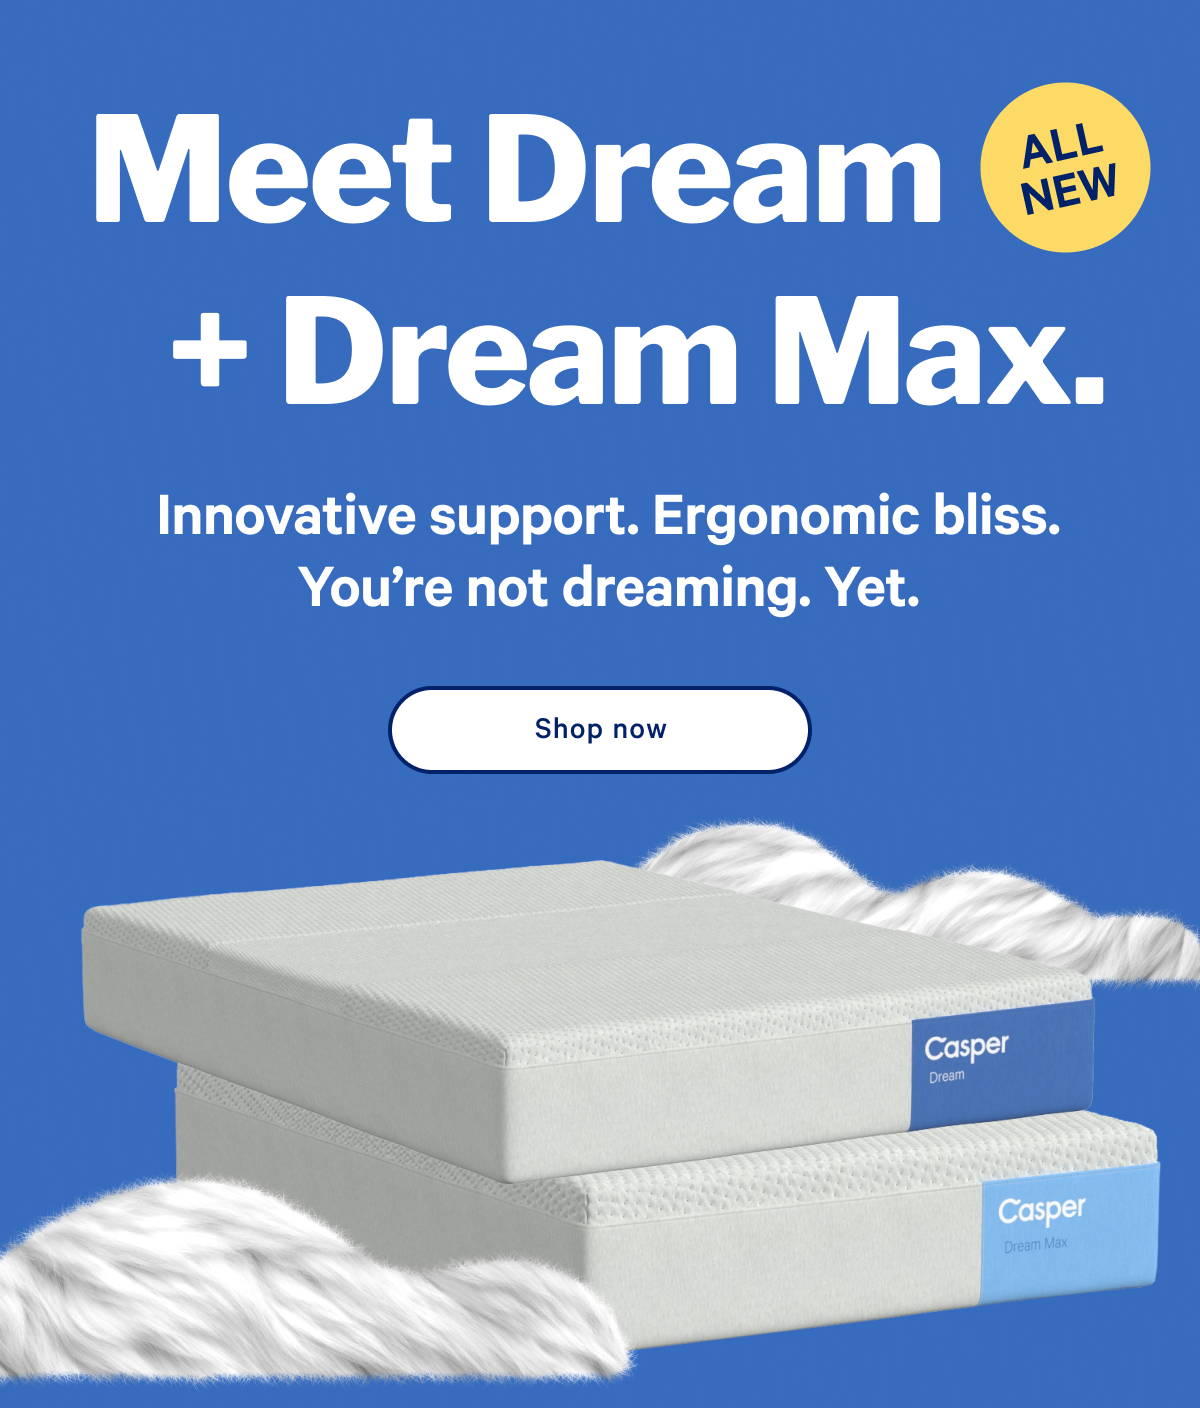 Meet the Dream + Dream Max. >> Innovative support. Ergonomic bliss. You’re not dreaming. Yet. >> Shop now >>